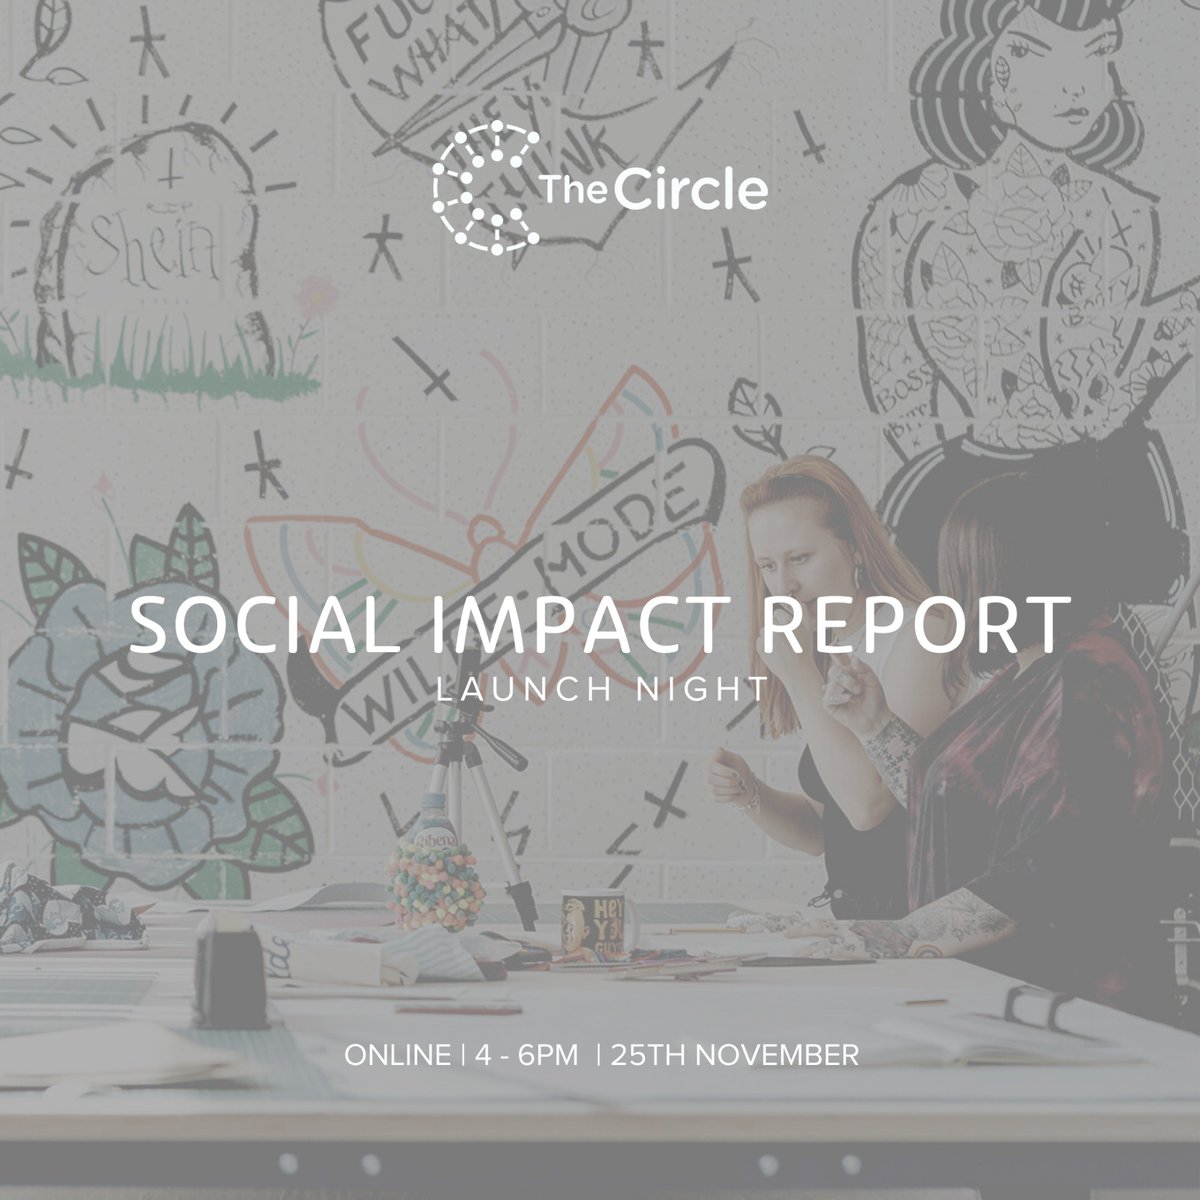 Join us as we take the launch of this years Social Impact Report online. 25th November 4-6pm. We would love for you to join us in celebrating The Circle and its community's achievements and the impact they have made in the past year ow.ly/Vkaa50GAEOt #SocialImpactReport